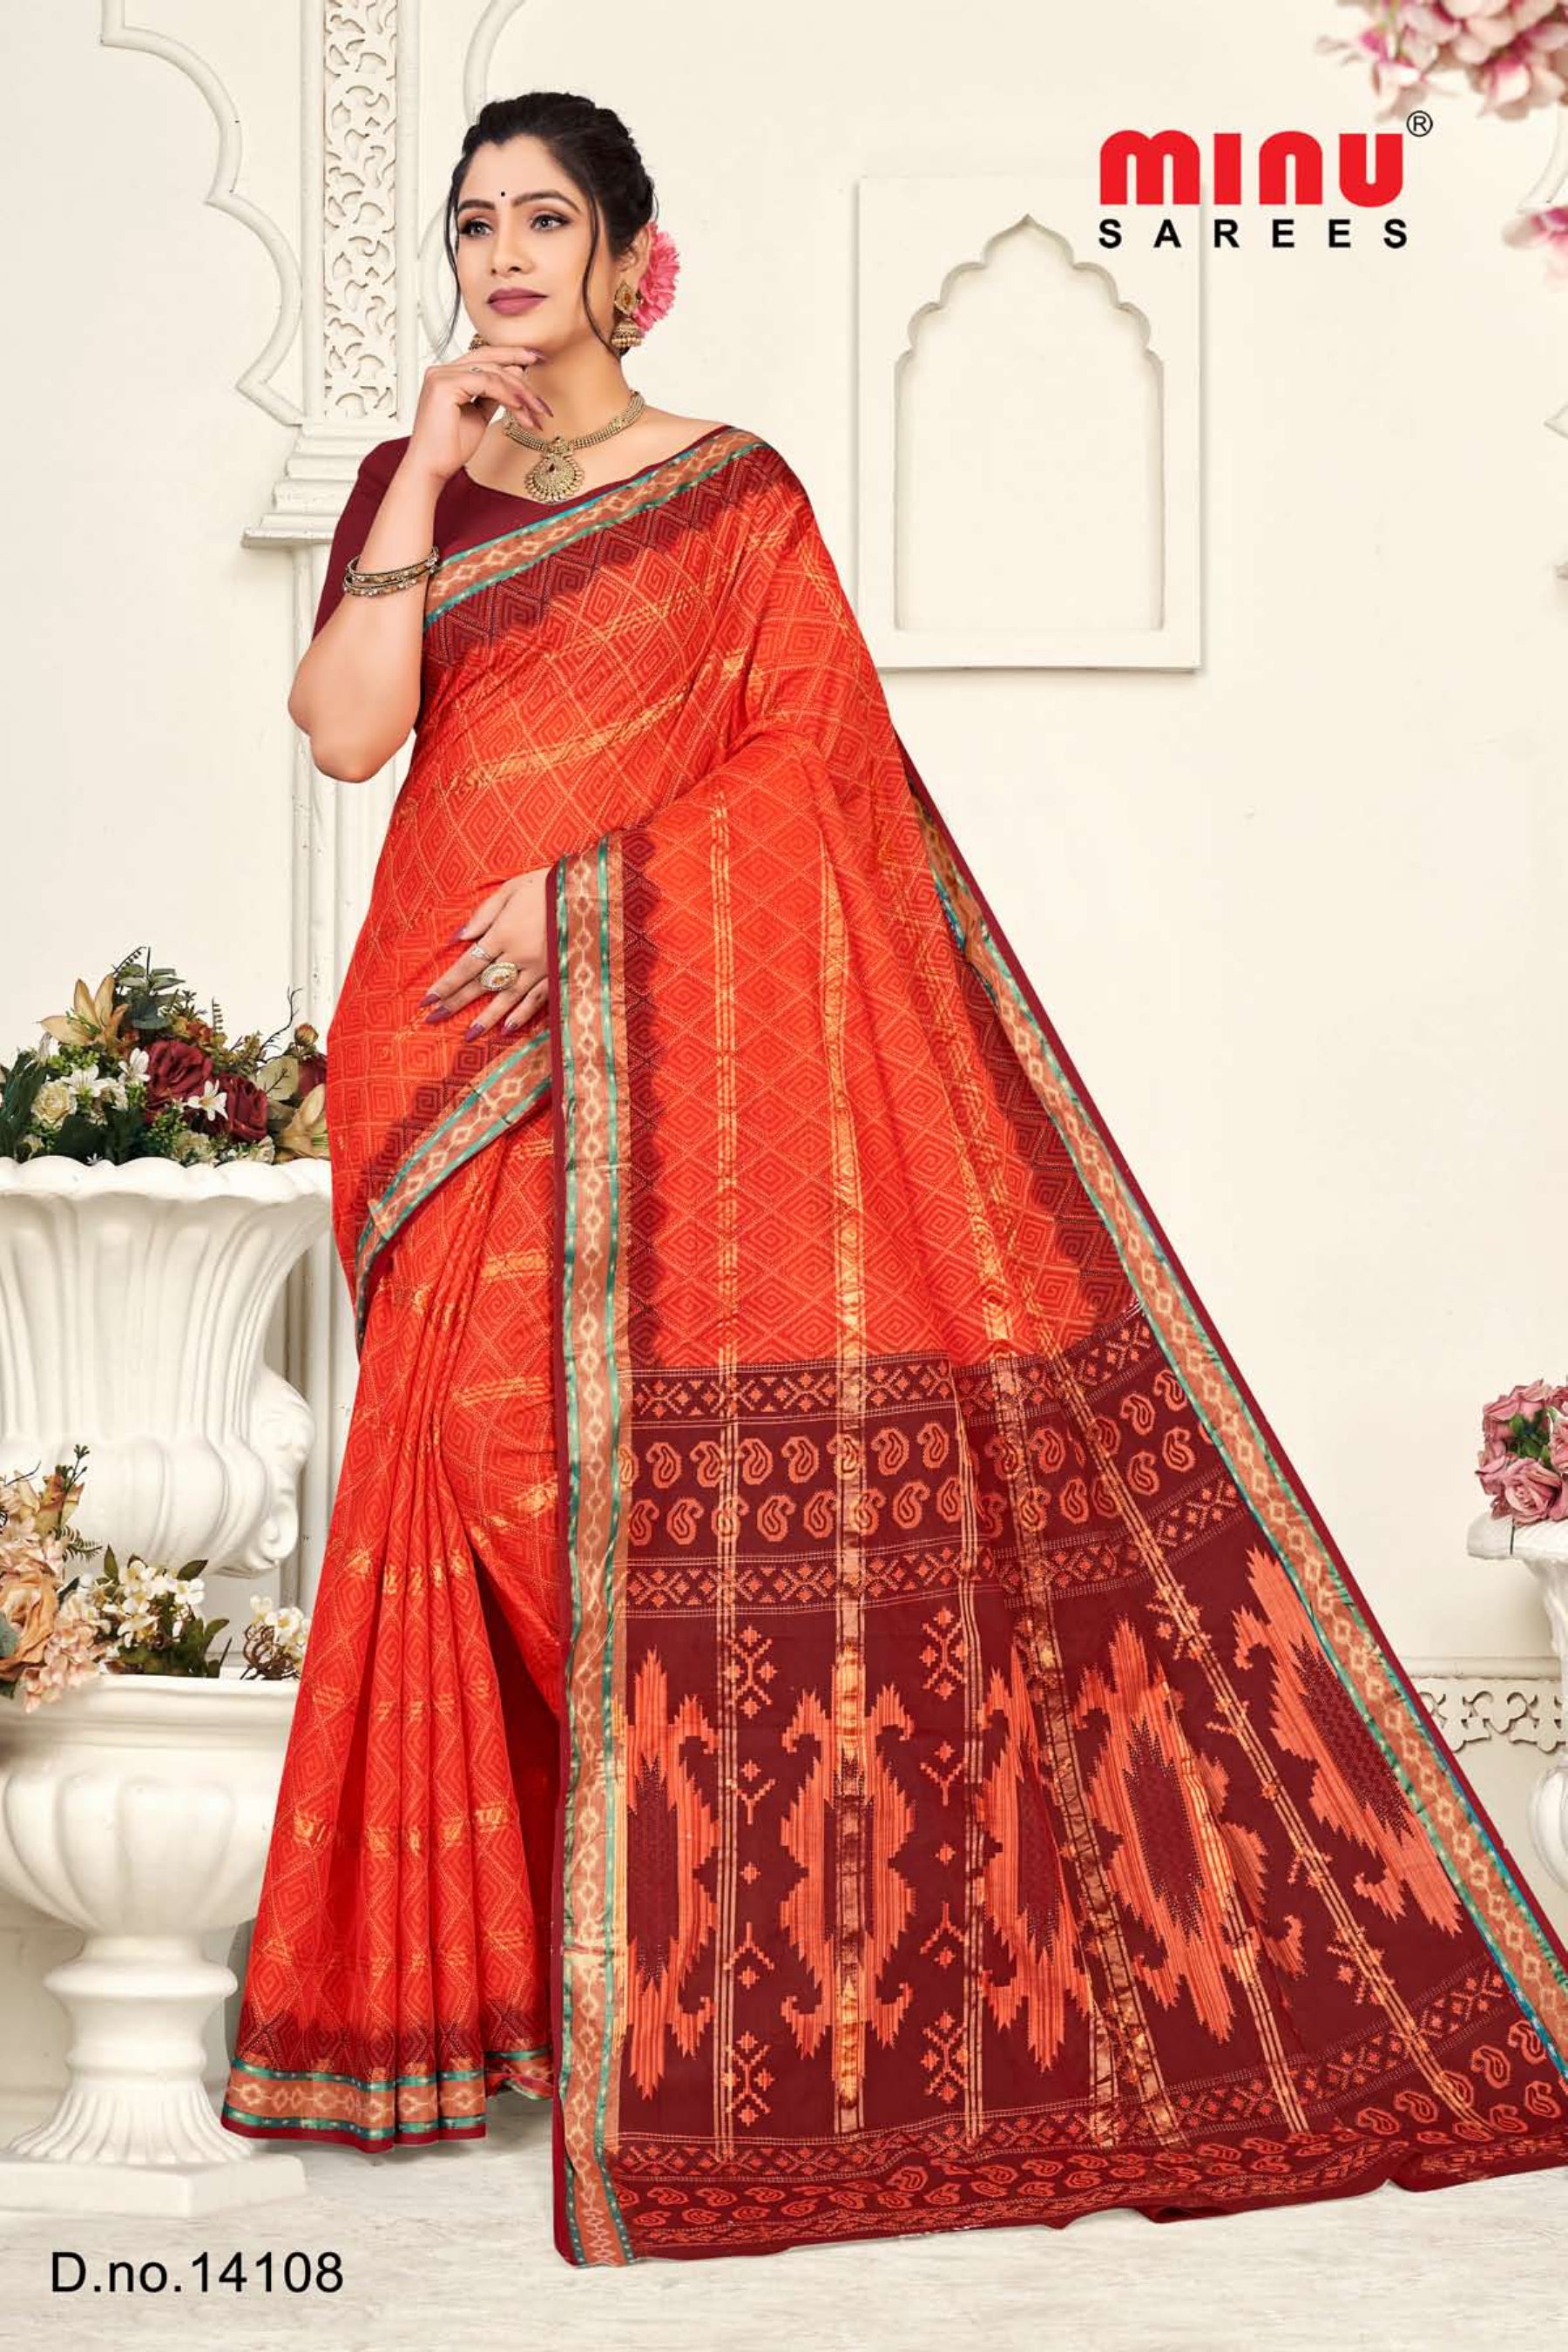 red color printed cotton saree wearing woman